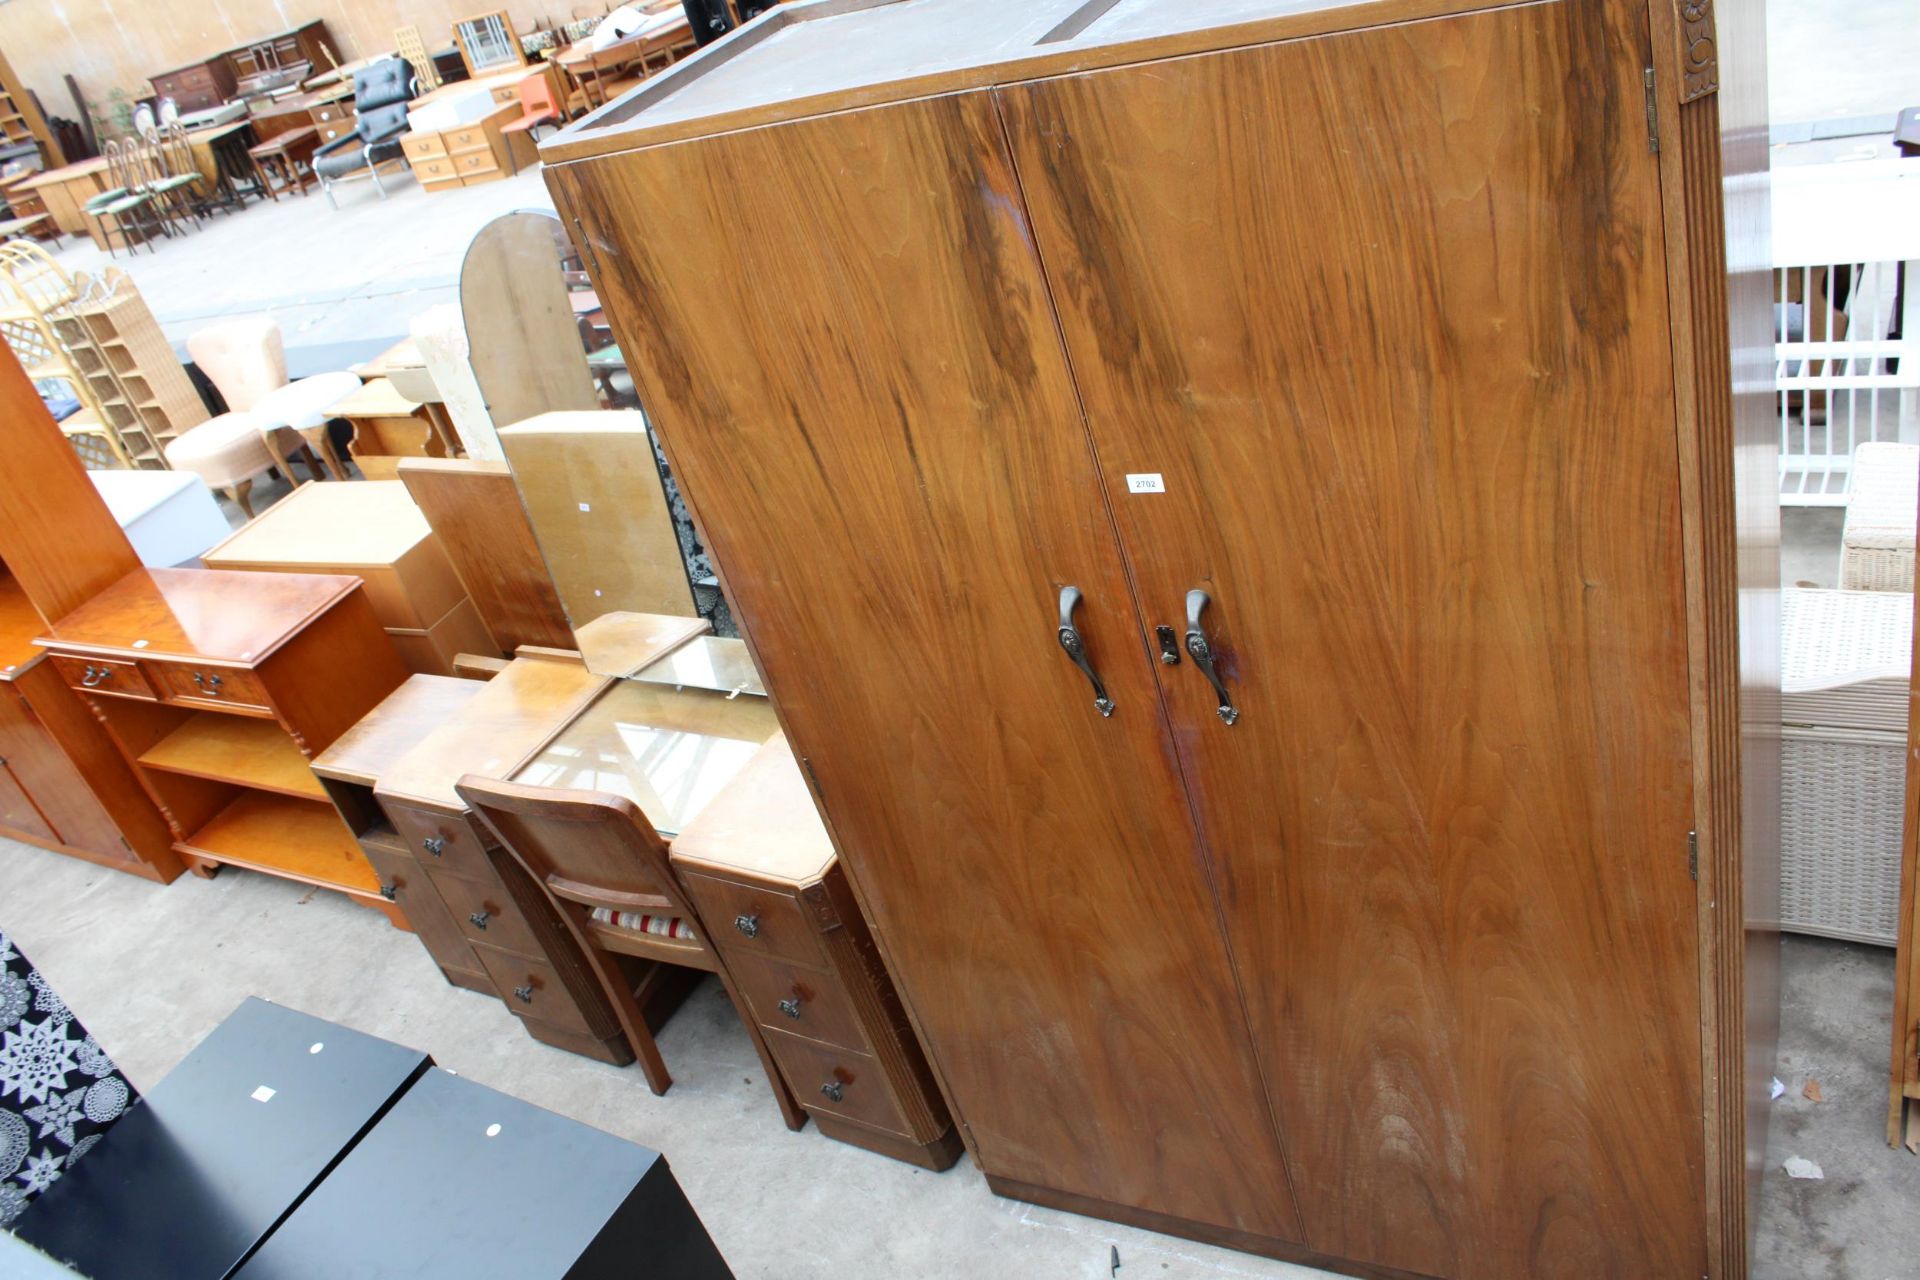 A MID 20TH CENTURY D.B.S. FURNITURE WALNUT TWO DOOR WARDROBE, DRESSING TABLE, 4'6" BEDHEAD AND FOOT,